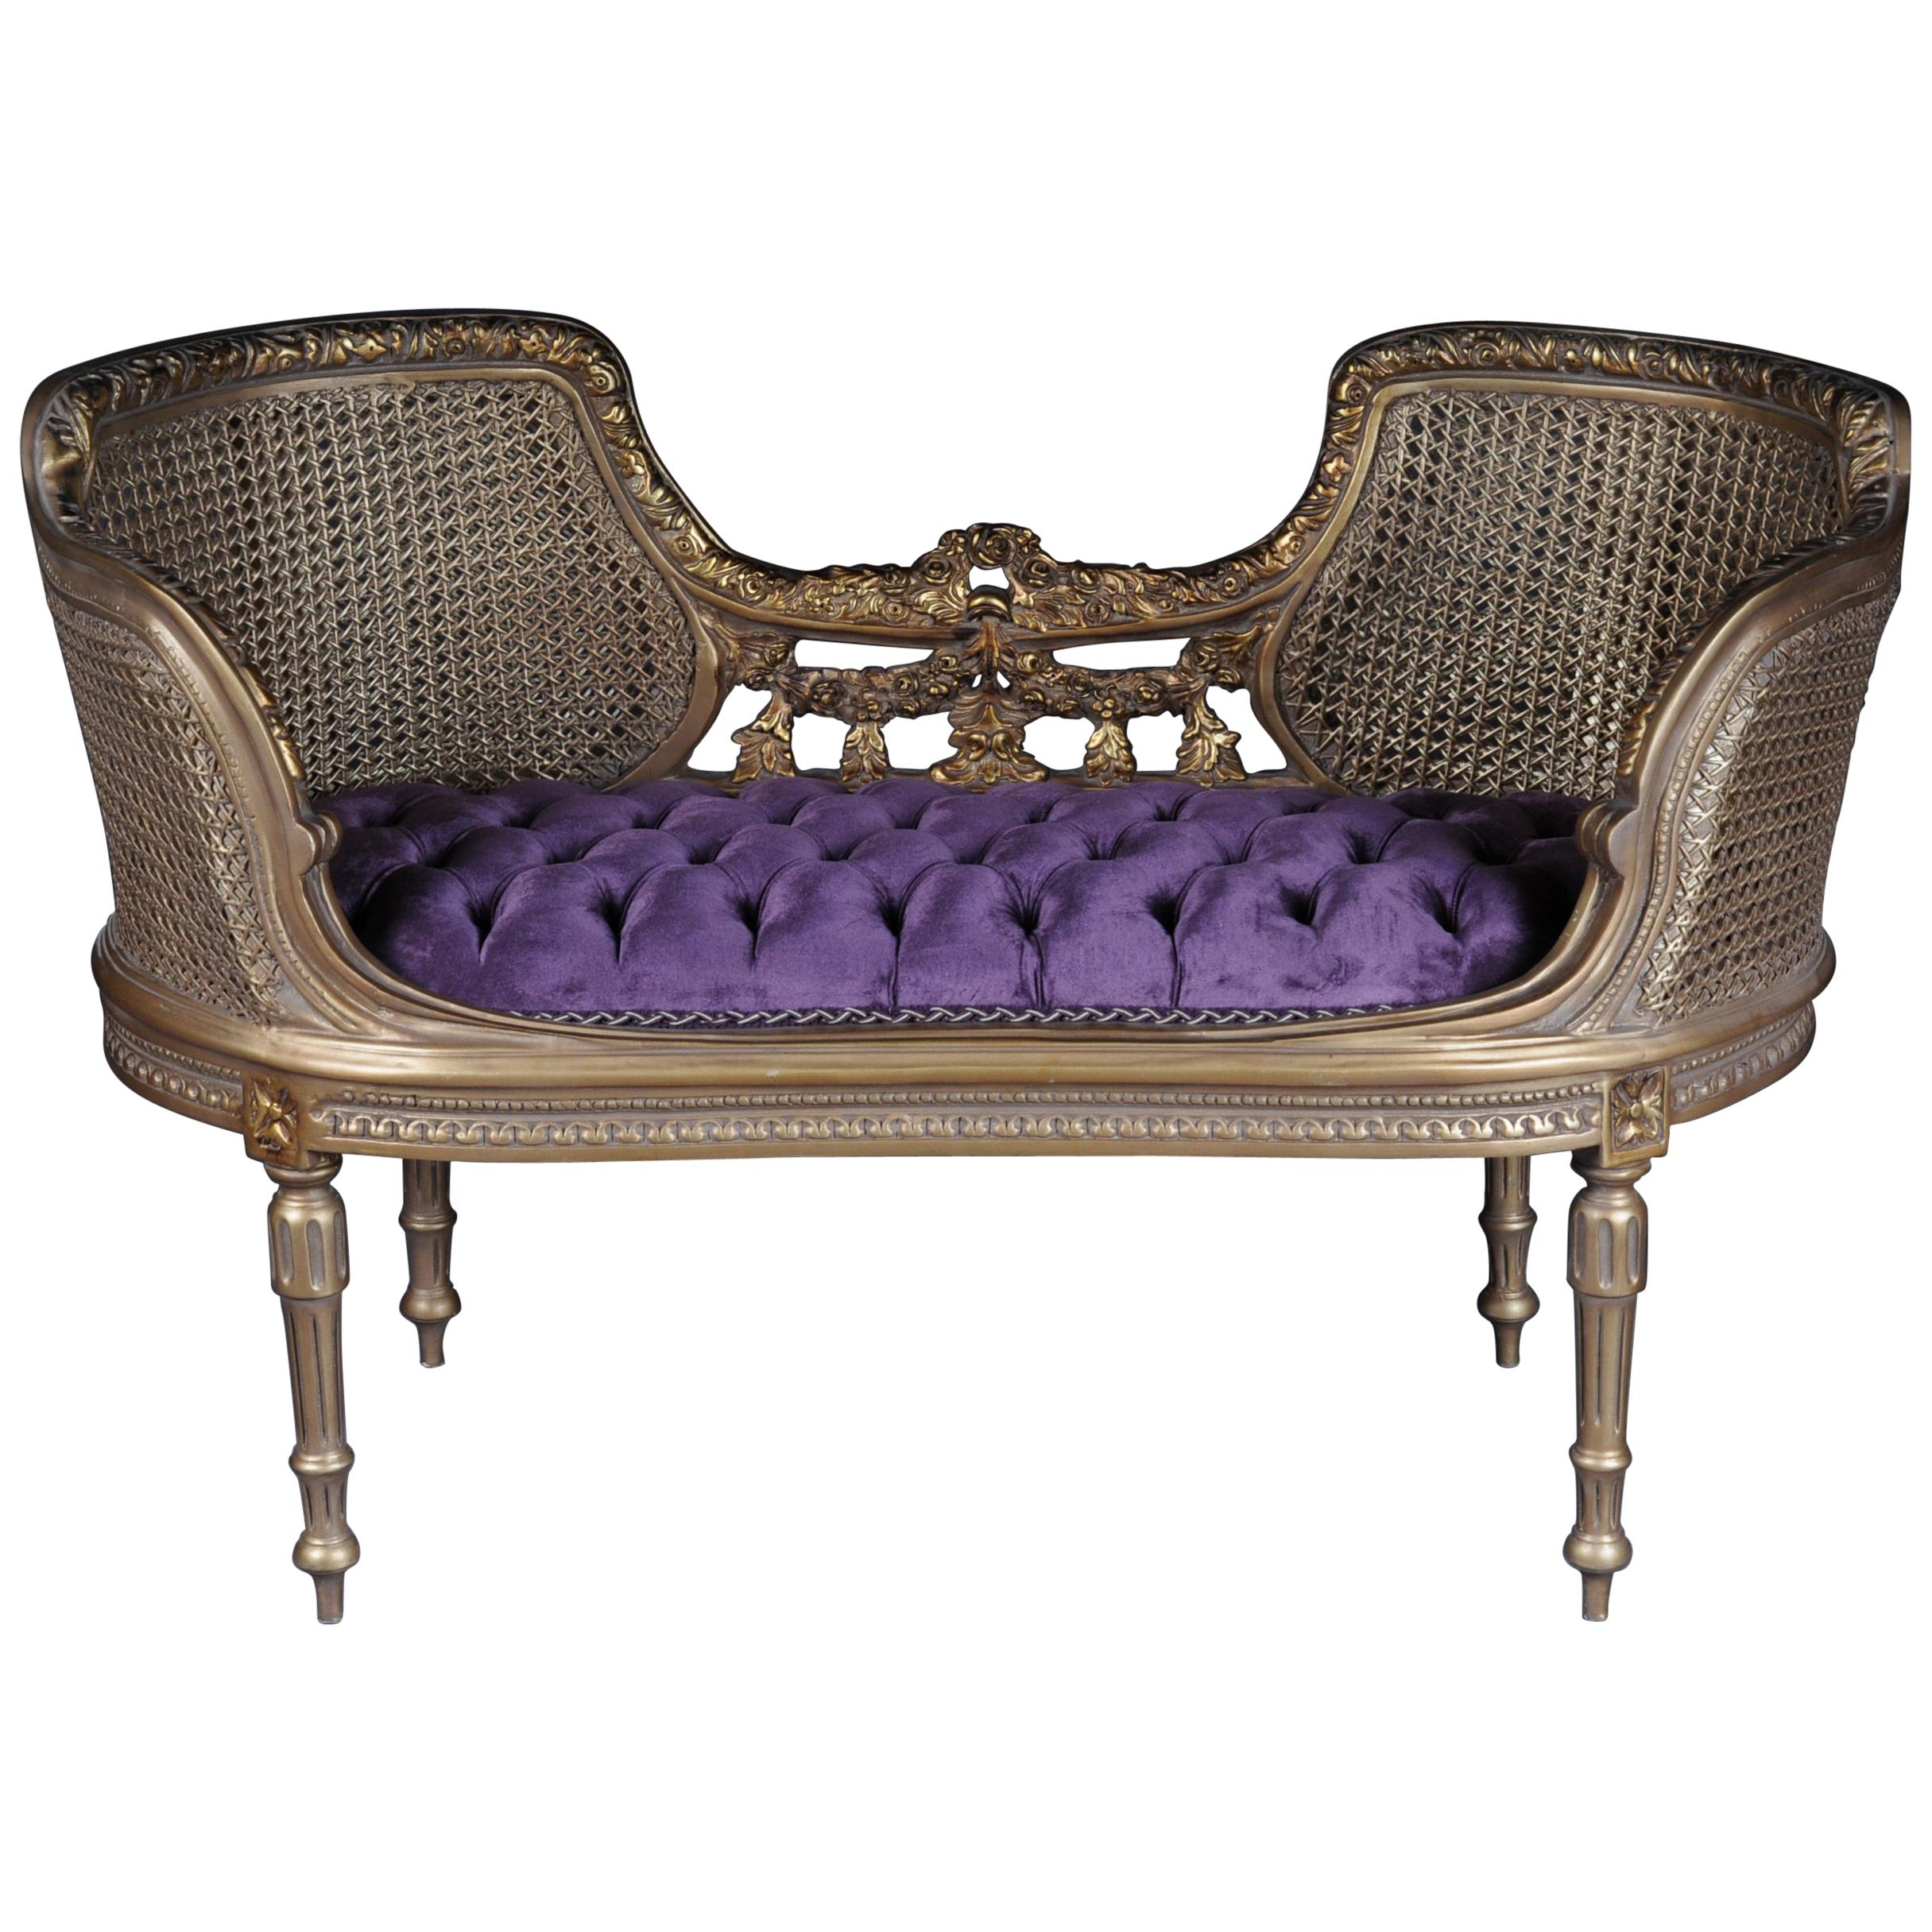 Beautiful French Bench, Sofa in the Louis XVI Style